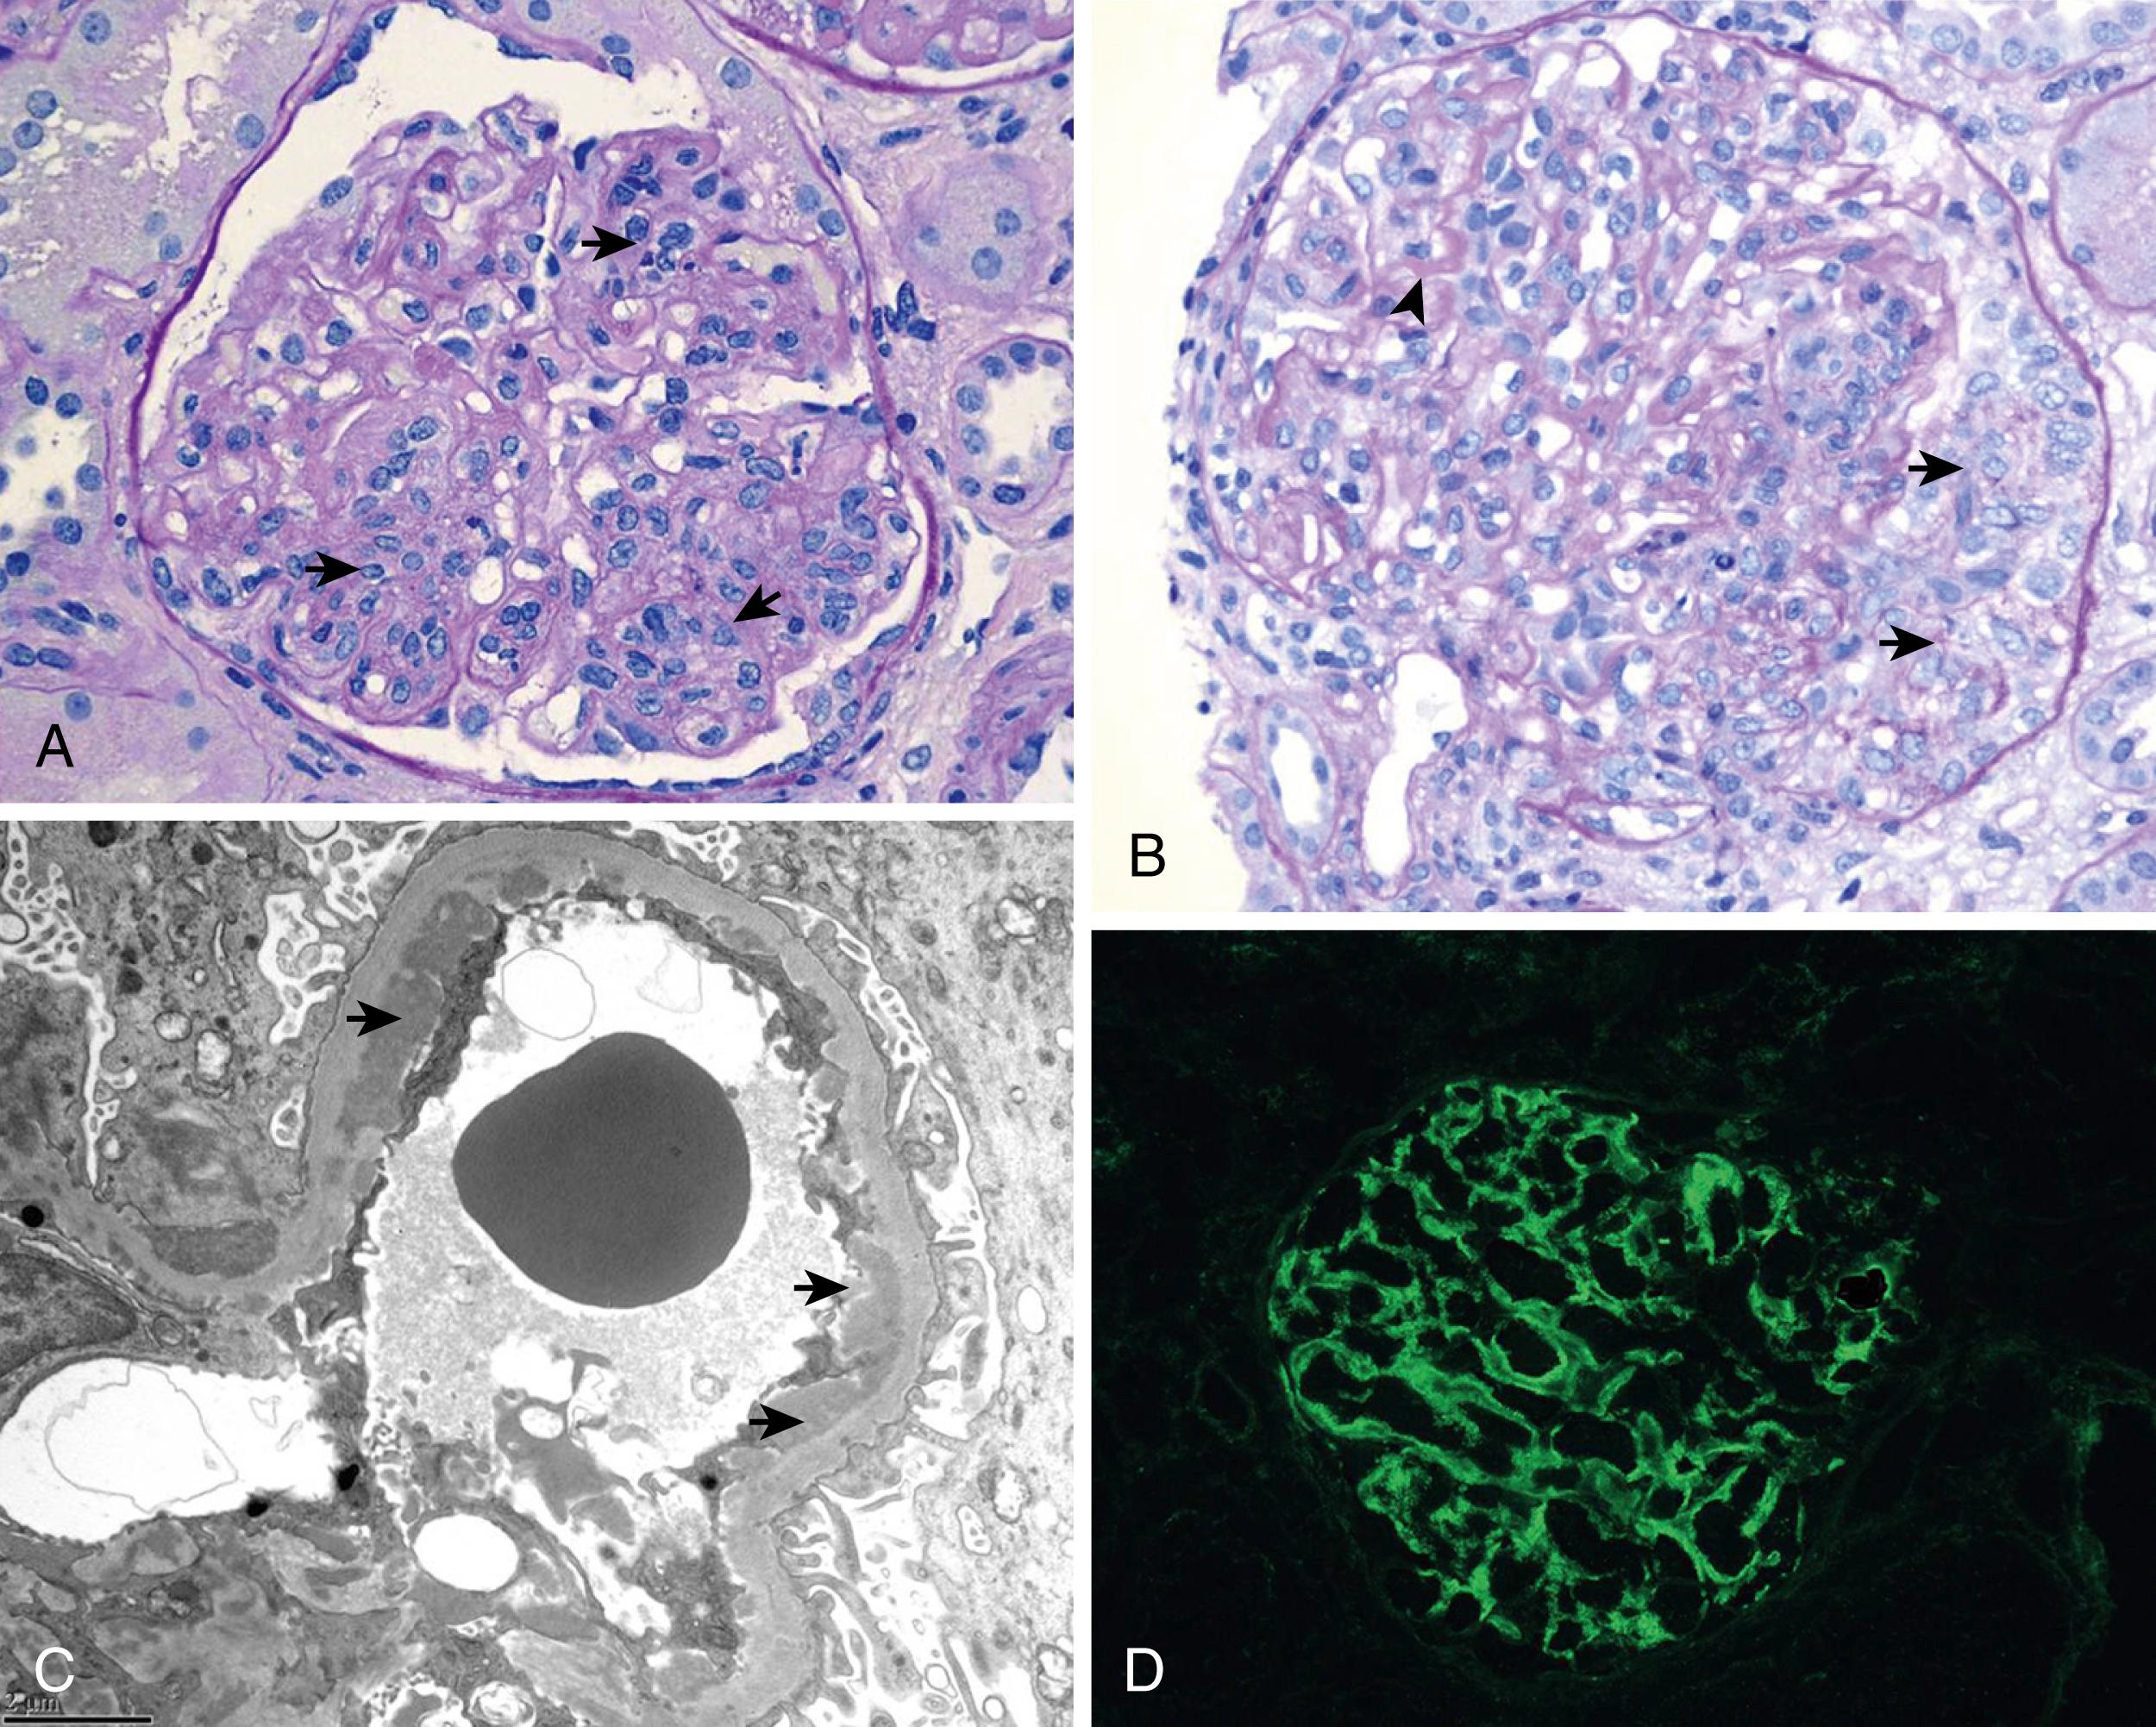 Fig. 23.5, Proliferative lupus nephritis. Representative photomicrographs of proliferative lupus nephritis. Biopsy from a patient with class IV(G)-A lupus nephritis illustrating (A) global (almost the entire glomerulus) endocapillary proliferation and exudation ( arrows ), periodic acid-Schiff stain, (B) cellular crescents from epithelial proliferation ( arrows ) and wire loops ( arrowhead ) from coalescent subendothelial immune deposits, periodic acid-Schiff stain, ( C ) electron micrograph showing numerous subendothelial ( arrows ) and mesangial electron dense deposits, and (D) immunofluorescent staining showing deposition of immunoglobulin (Ig)G in glomerular capillary walls and mesangium.